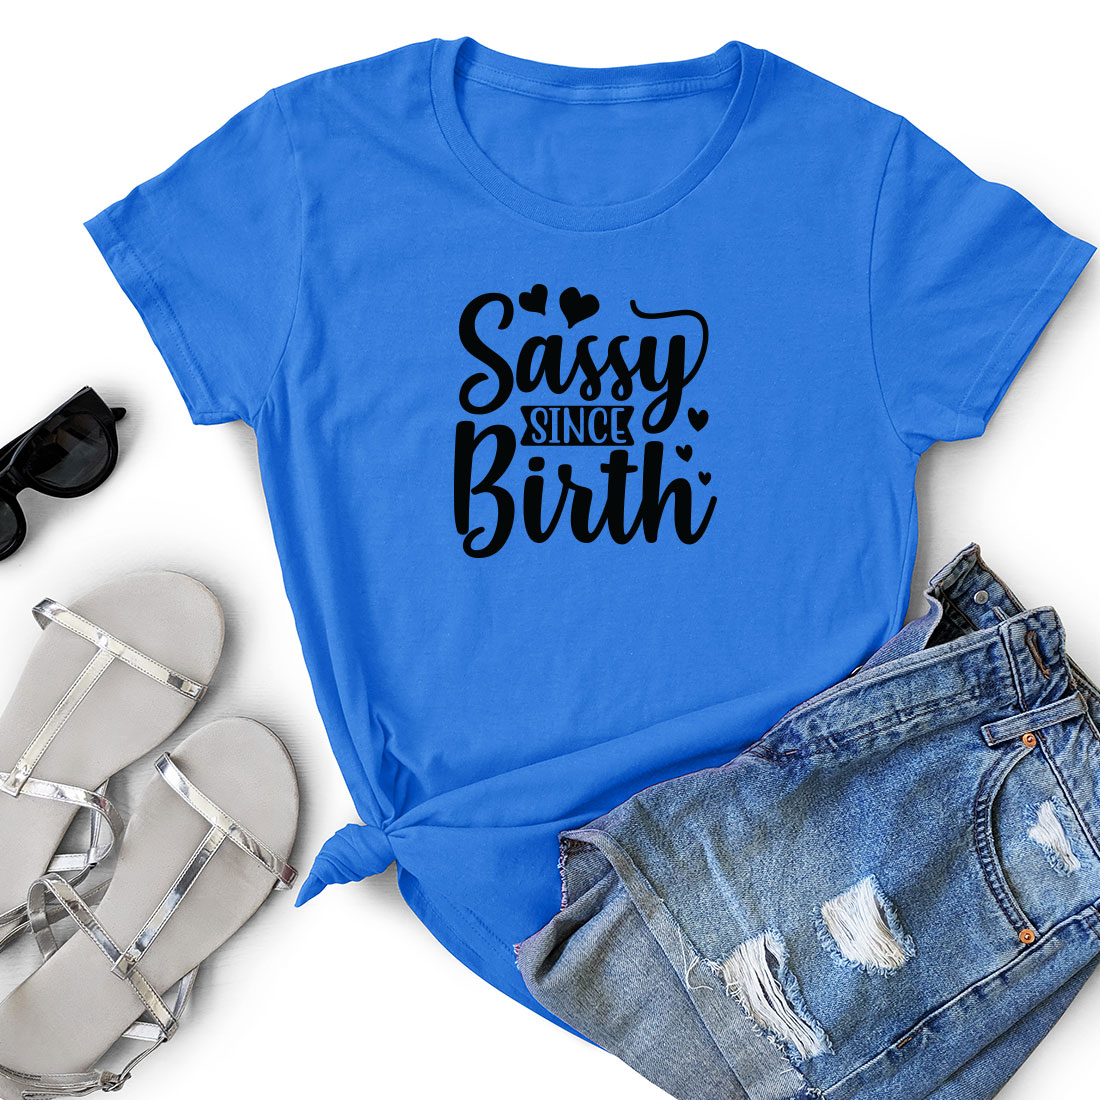 T - shirt that says sasy since birth next to a pair of shorts.